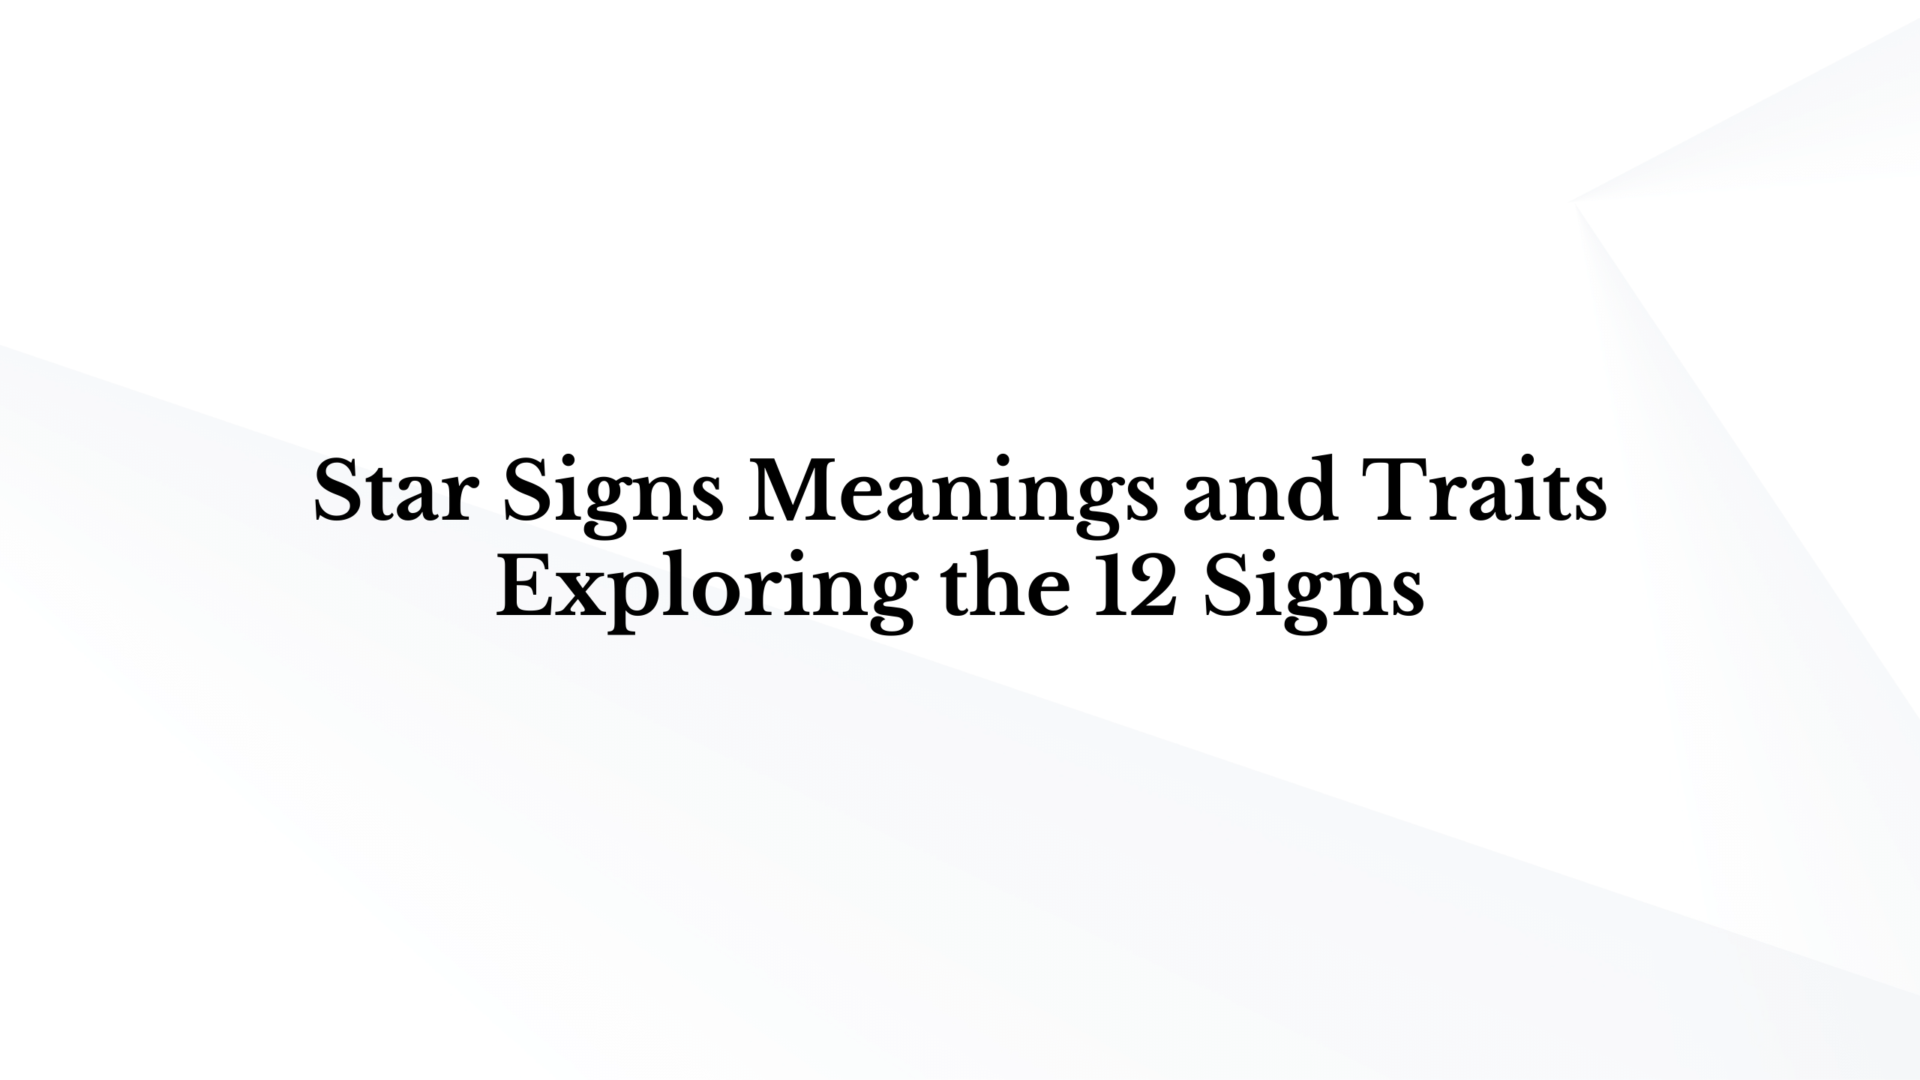 Star Signs Meanings and Traits: Exploring the 12 Signs